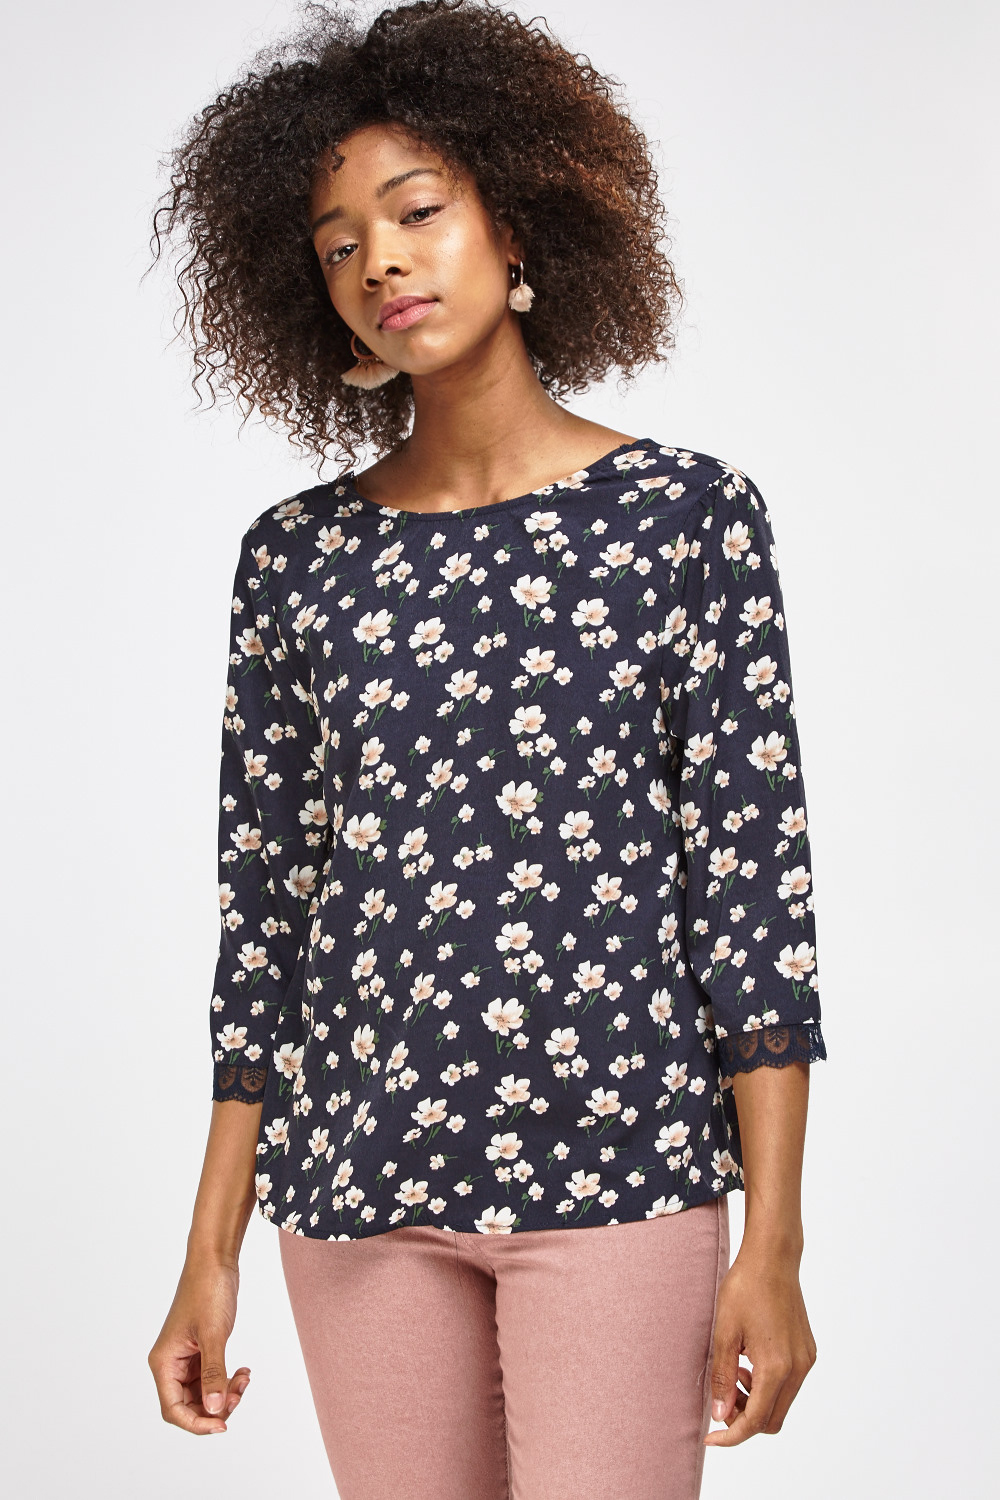 Lace Trim Floral Printed Blouse - Just $2